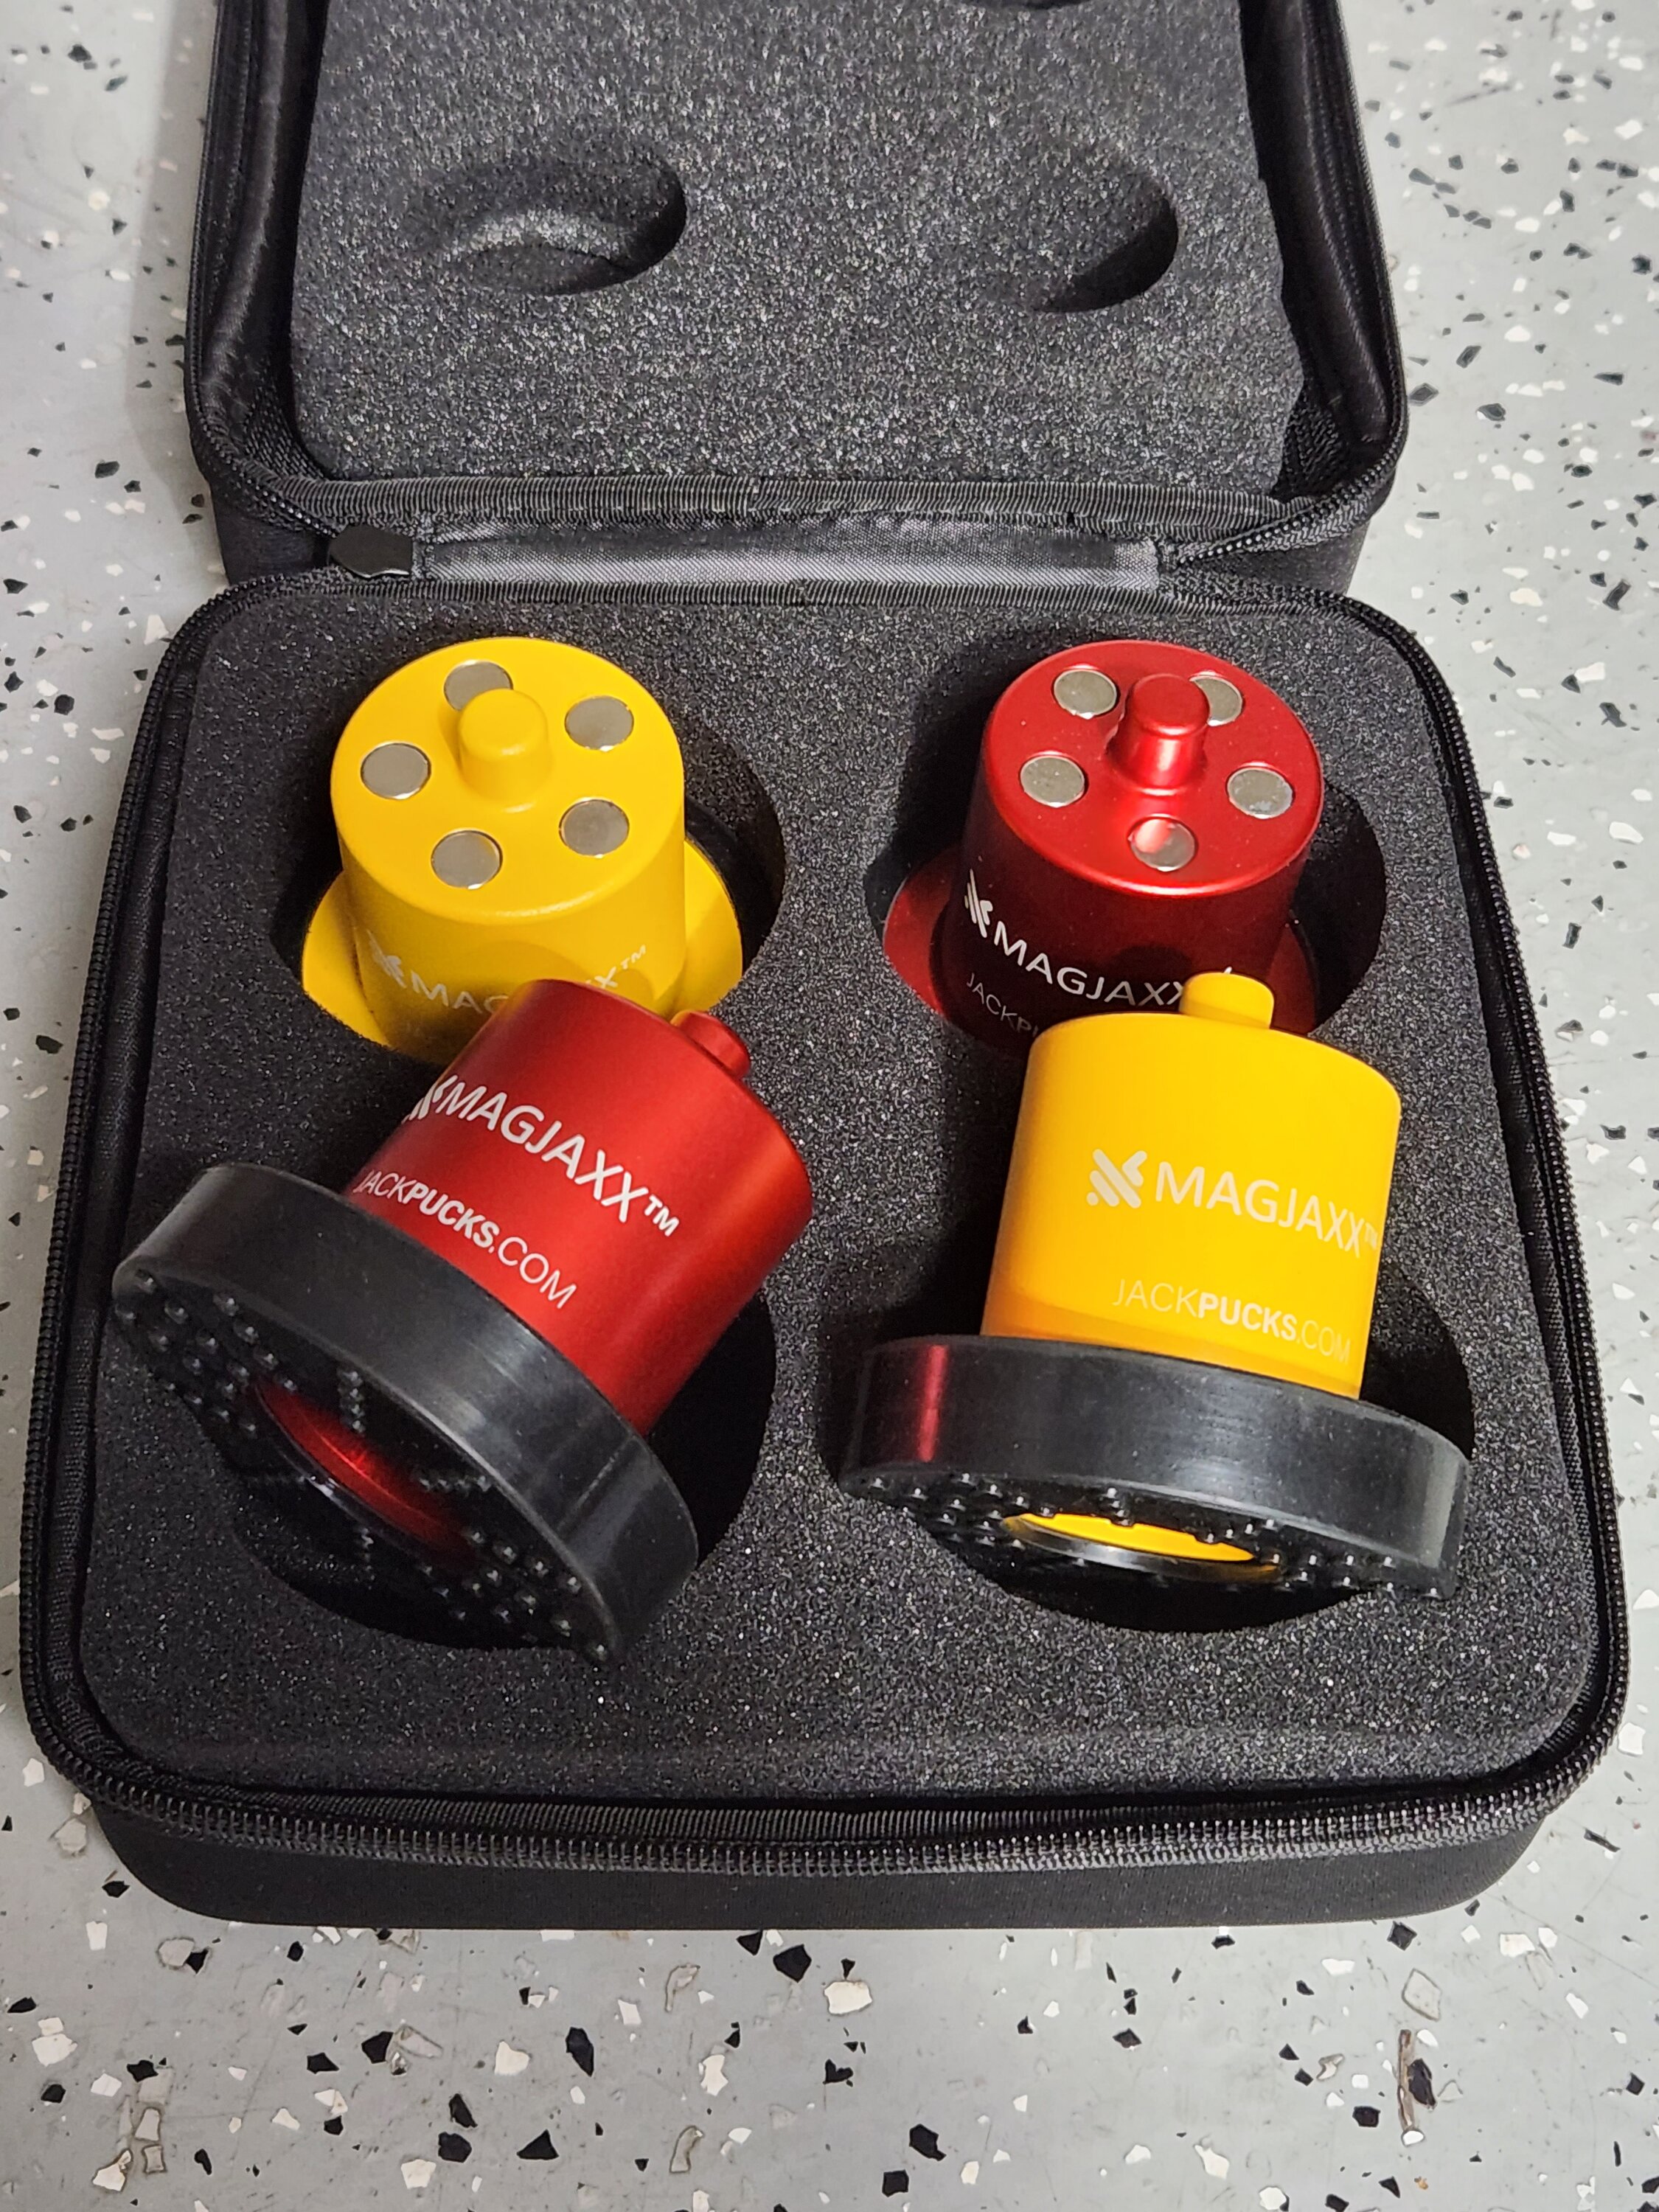 Rivian R1T R1S Yellow & Red GEN2 JACK PUCKS! Thousands Ready to Ship! 20230422_082012